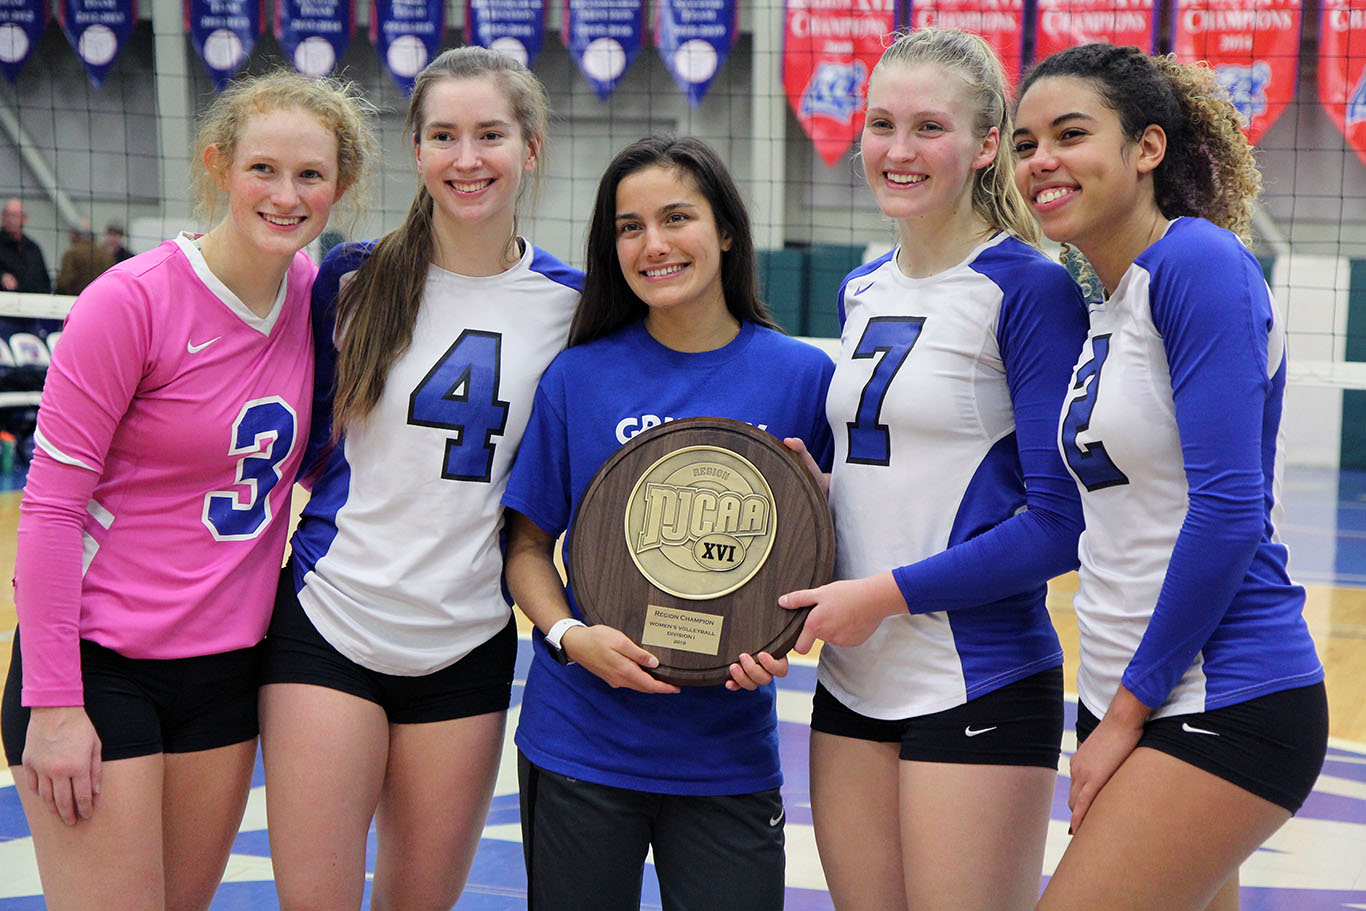 Grizzly sophomores Emily Moore, Kelly Wiedemann, Priscilla Crowell, Julia Dunning and Camilly Cristiny pose with the 2019  Region 16 Championship trophy.